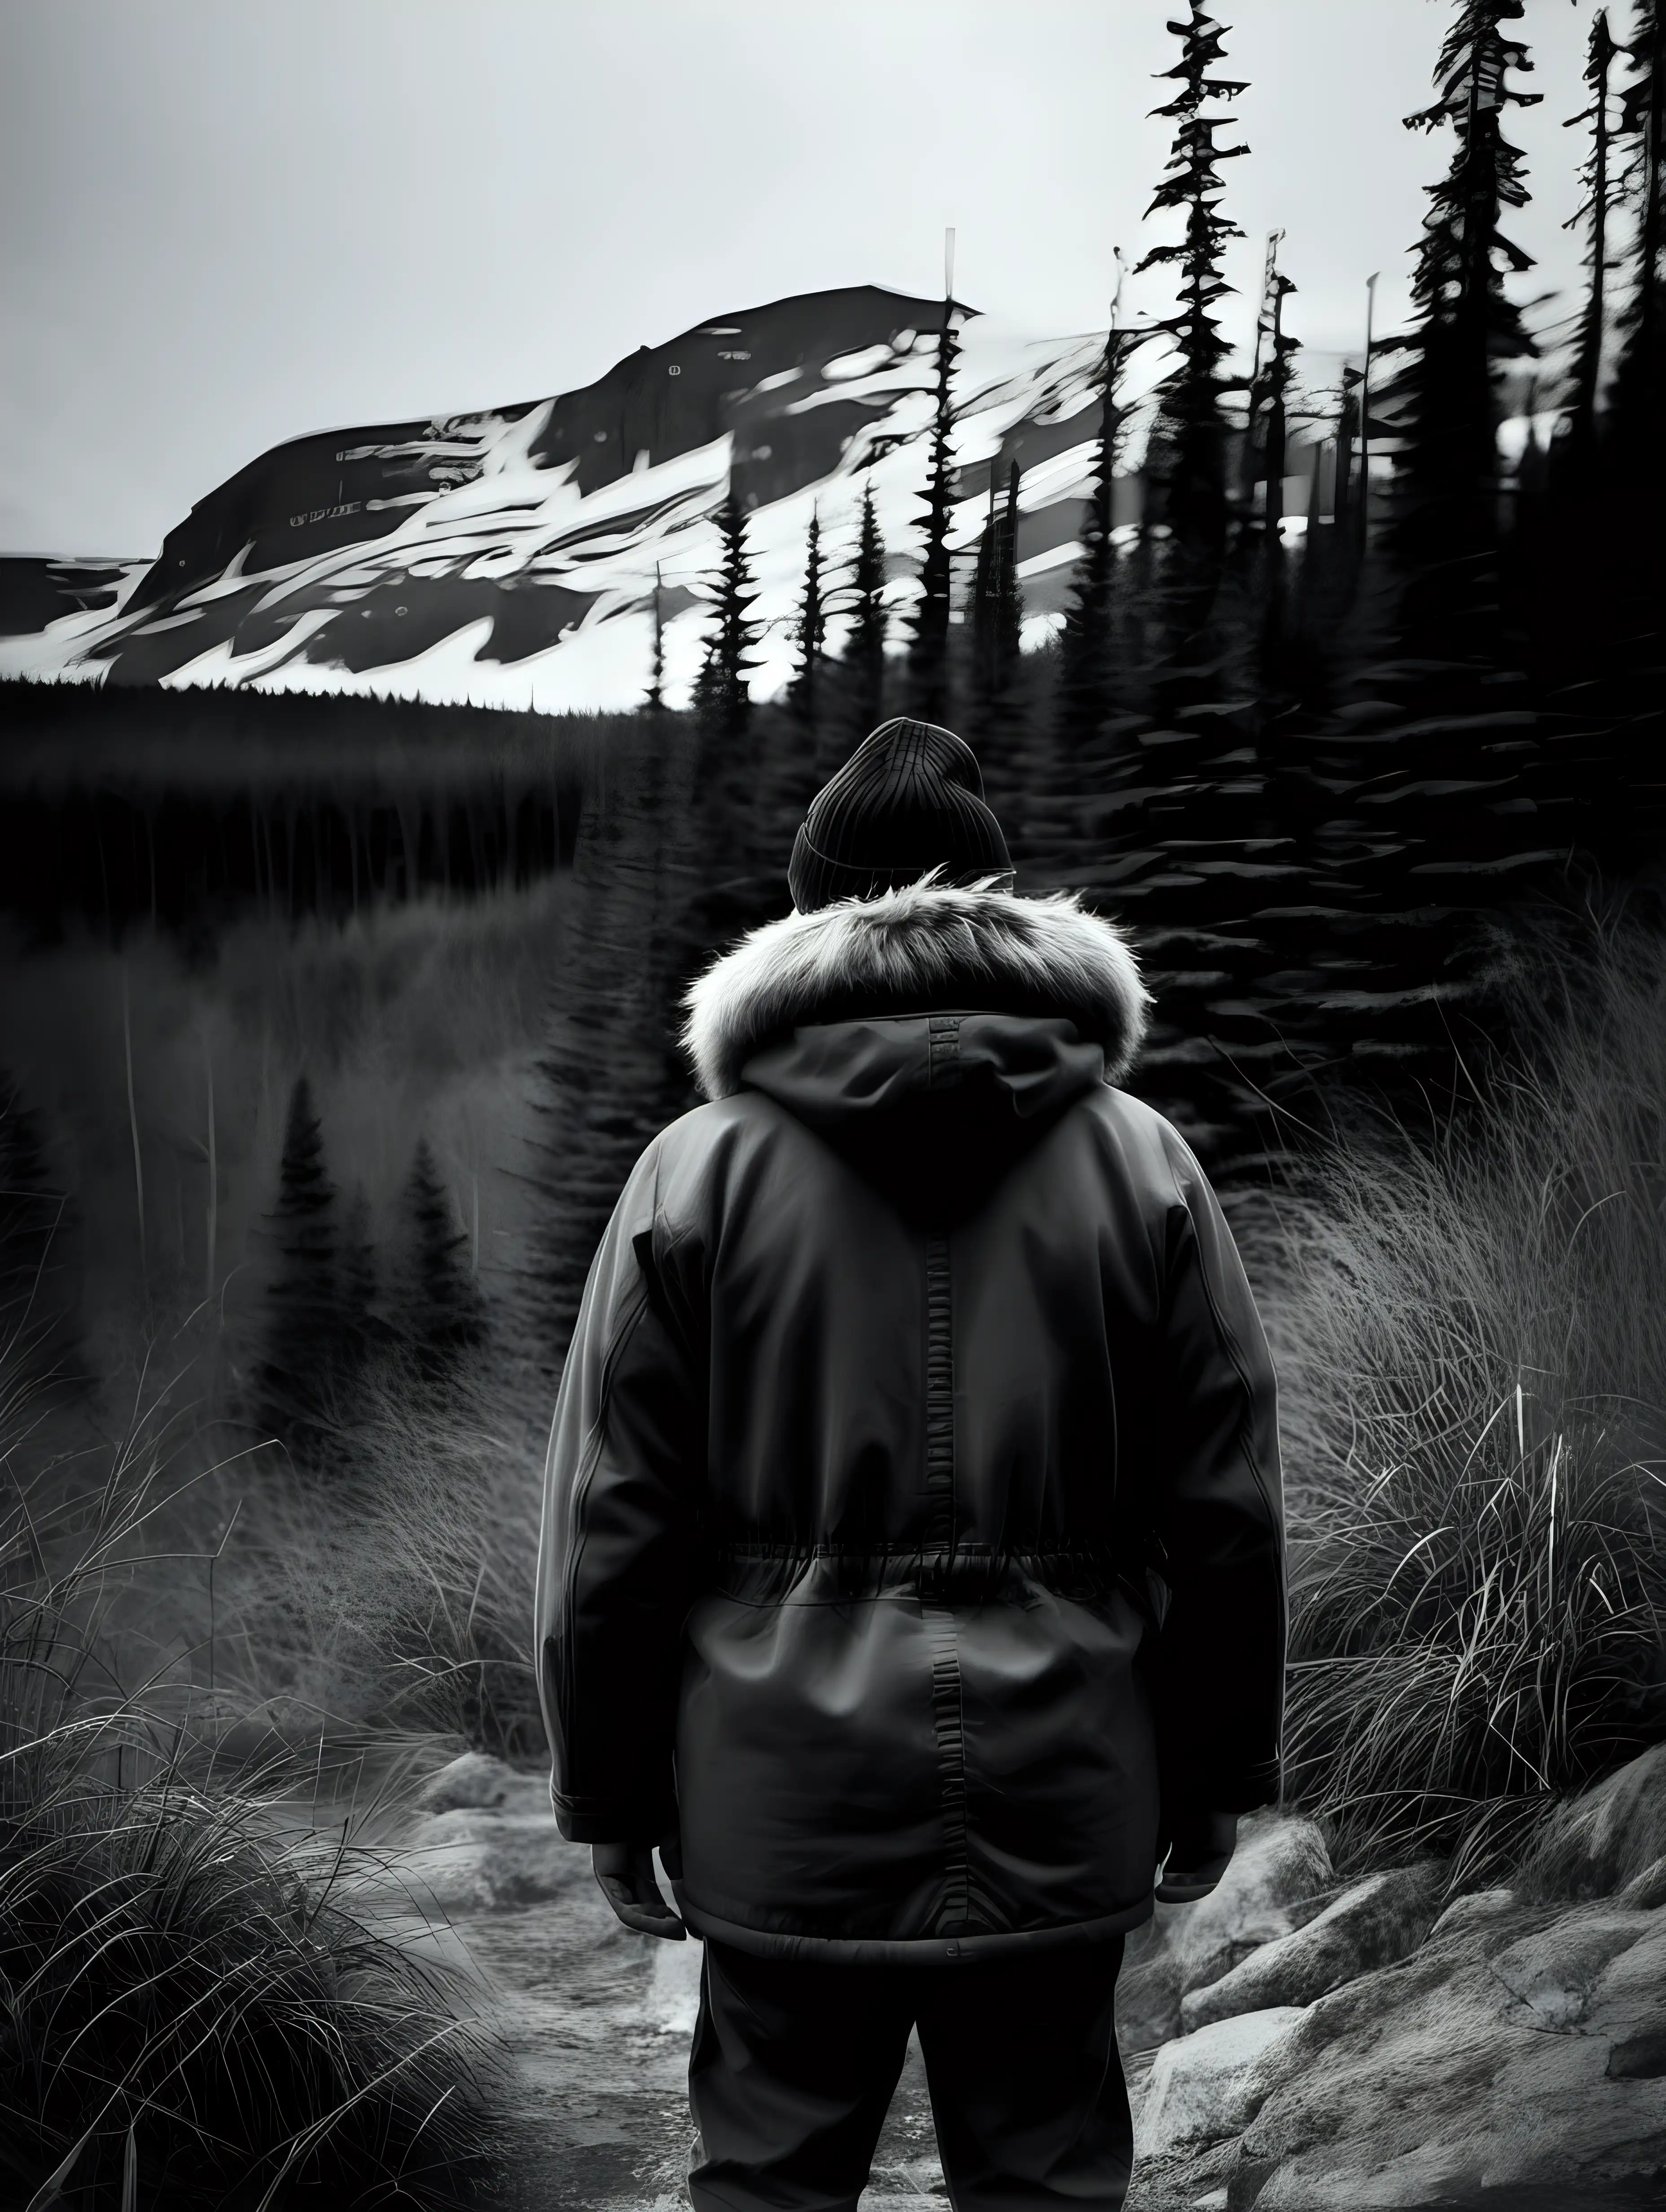 Moody Black and White Image of a Man in Wooly Hat and Parka in Canadian Wilderness